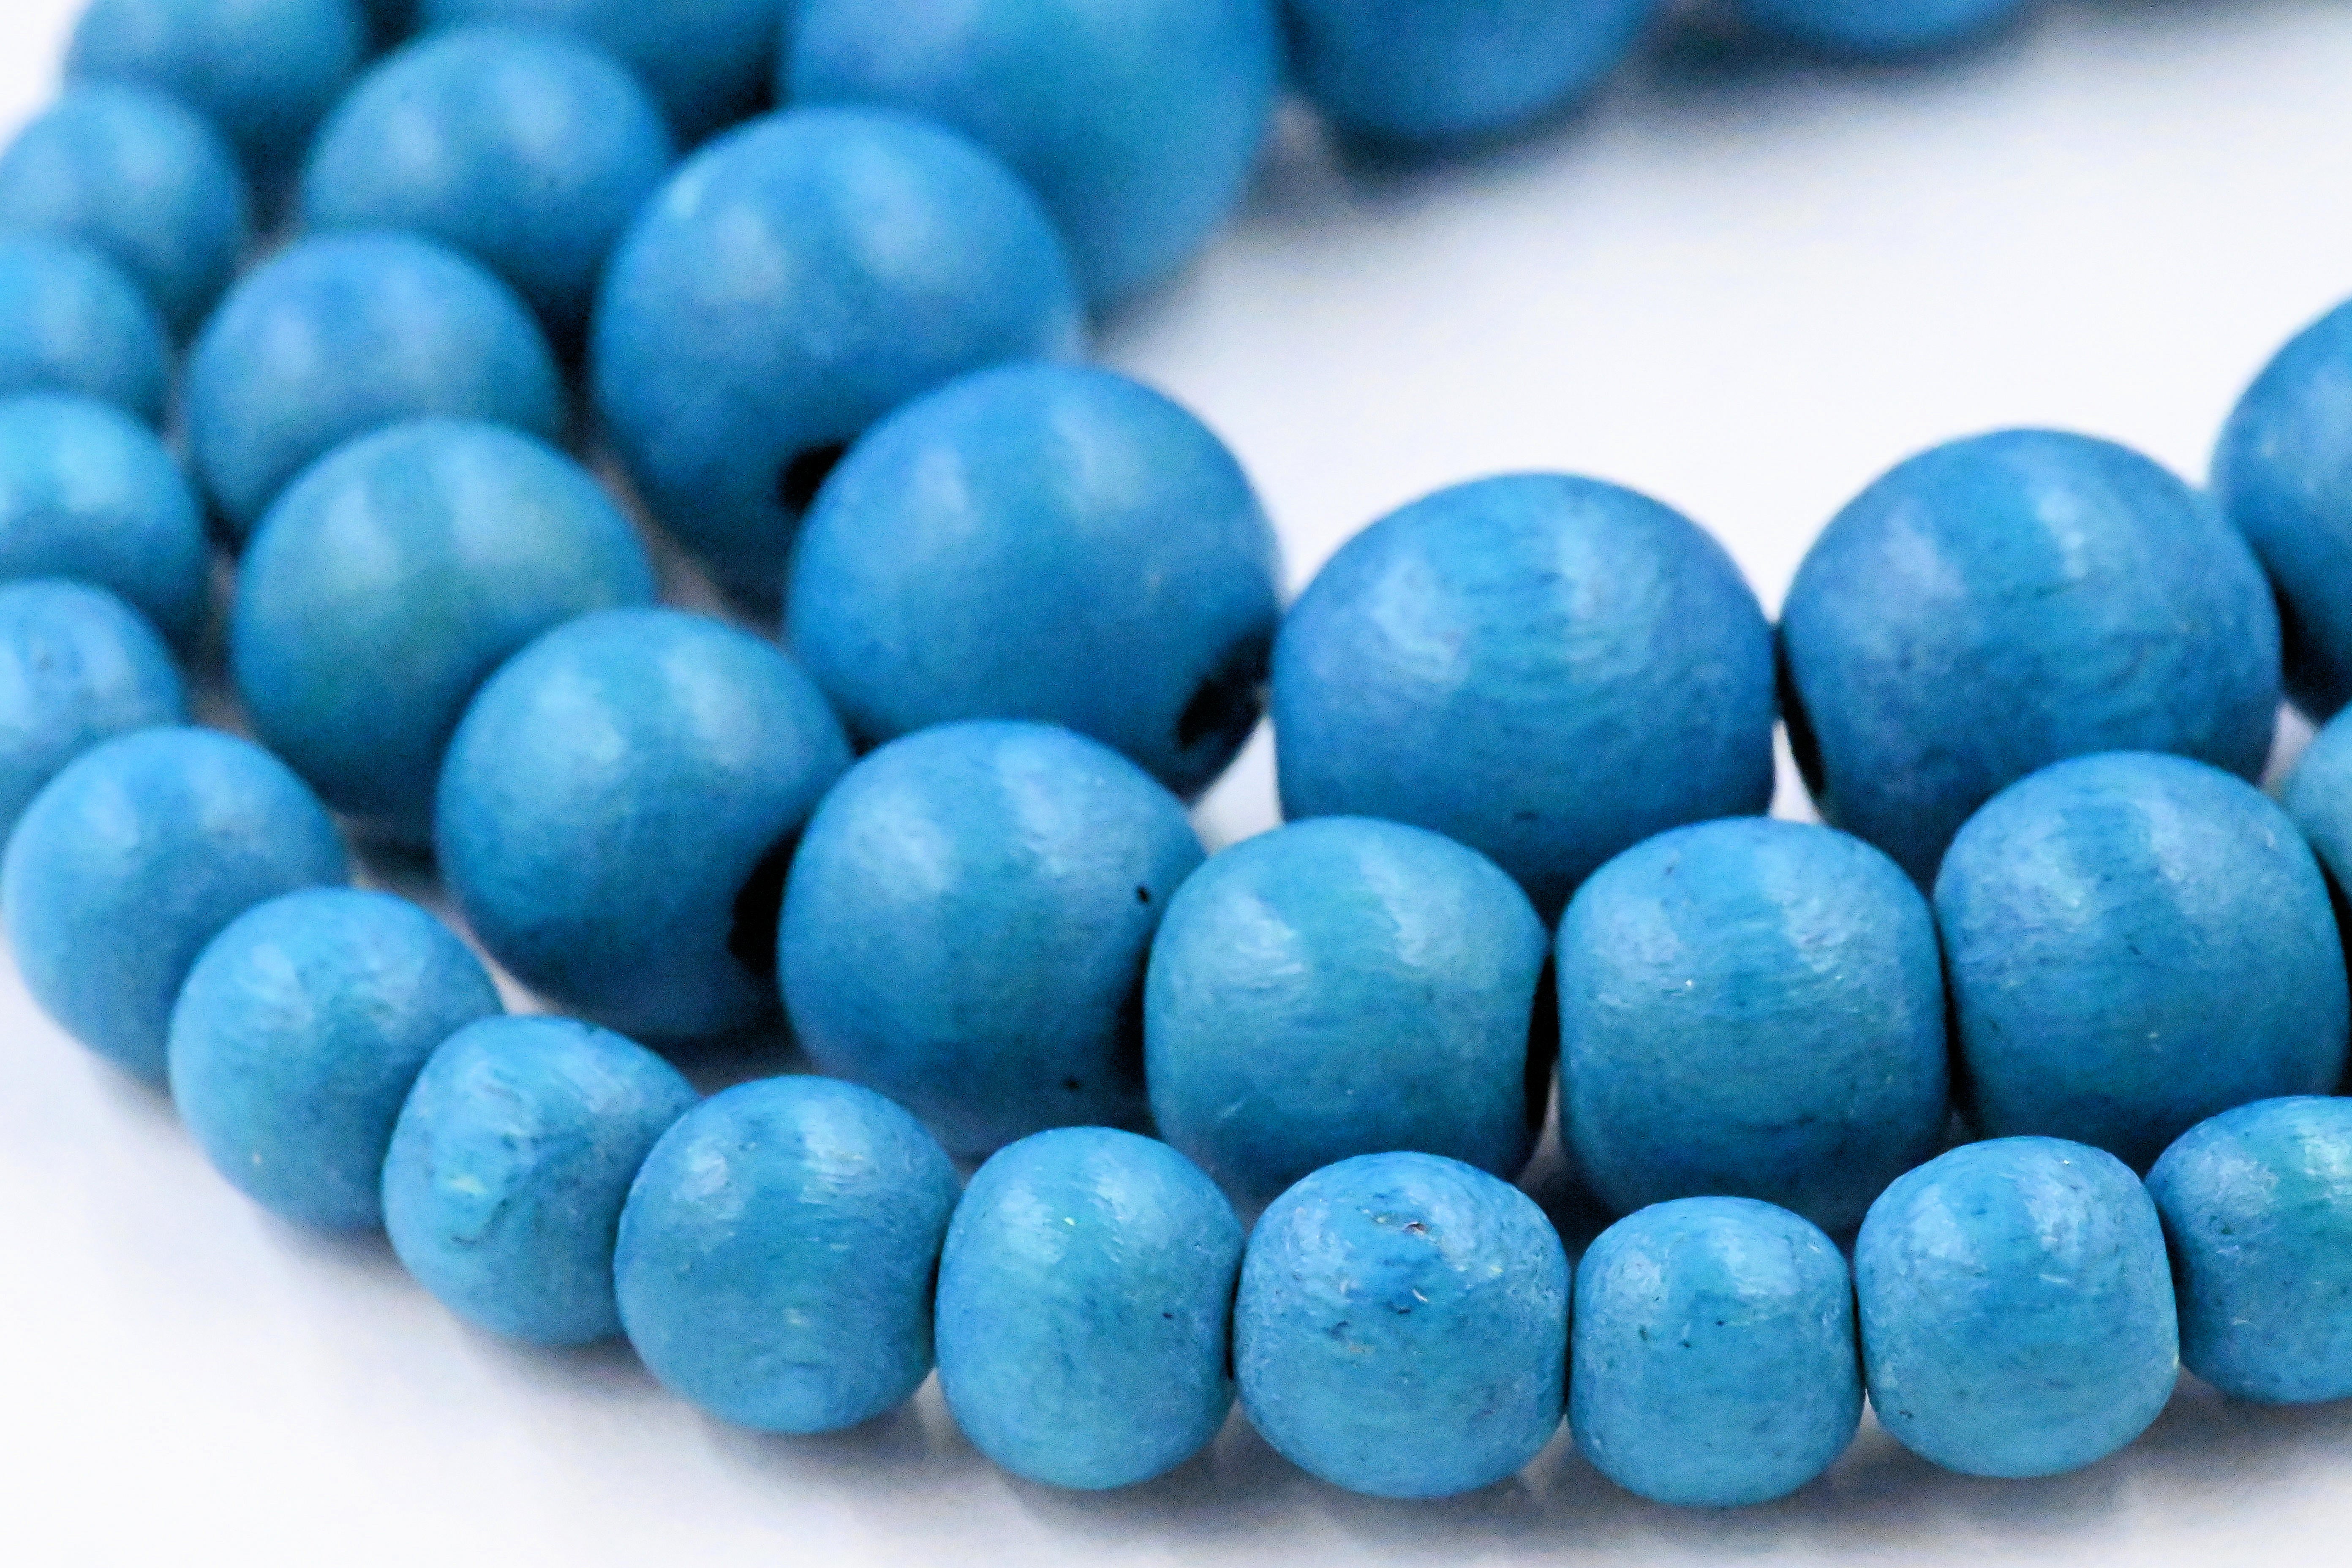 TWO STRANDS Blue Macaw Beads 6mm 8mm 10mm Wood beads -16 inch strand